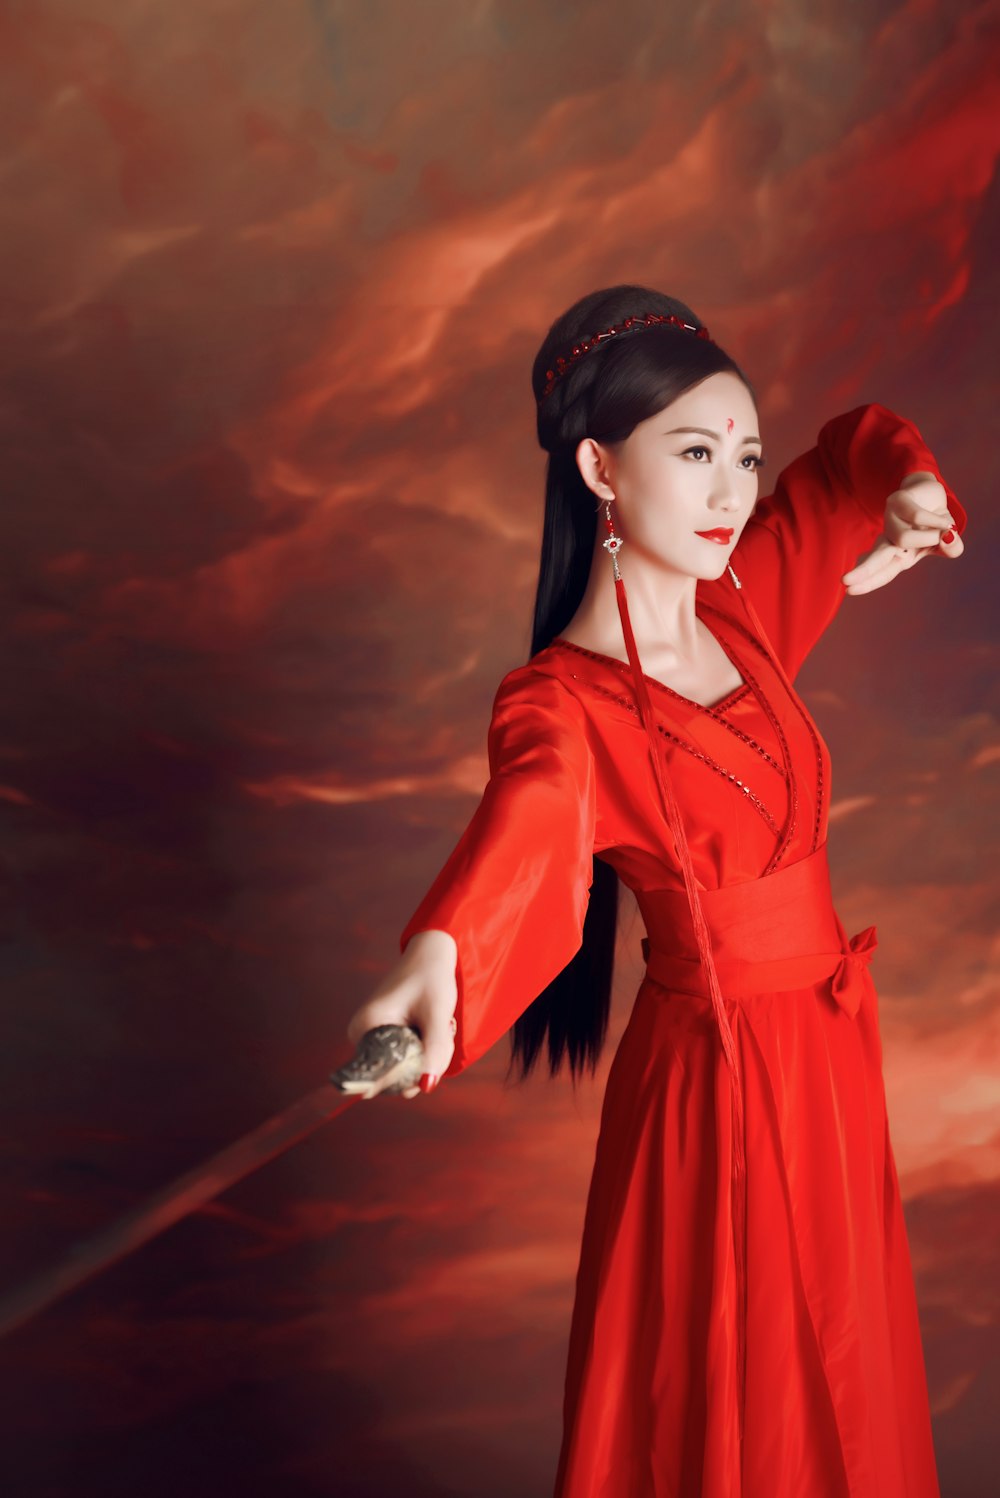 woman in red long sleeve dress holding stick